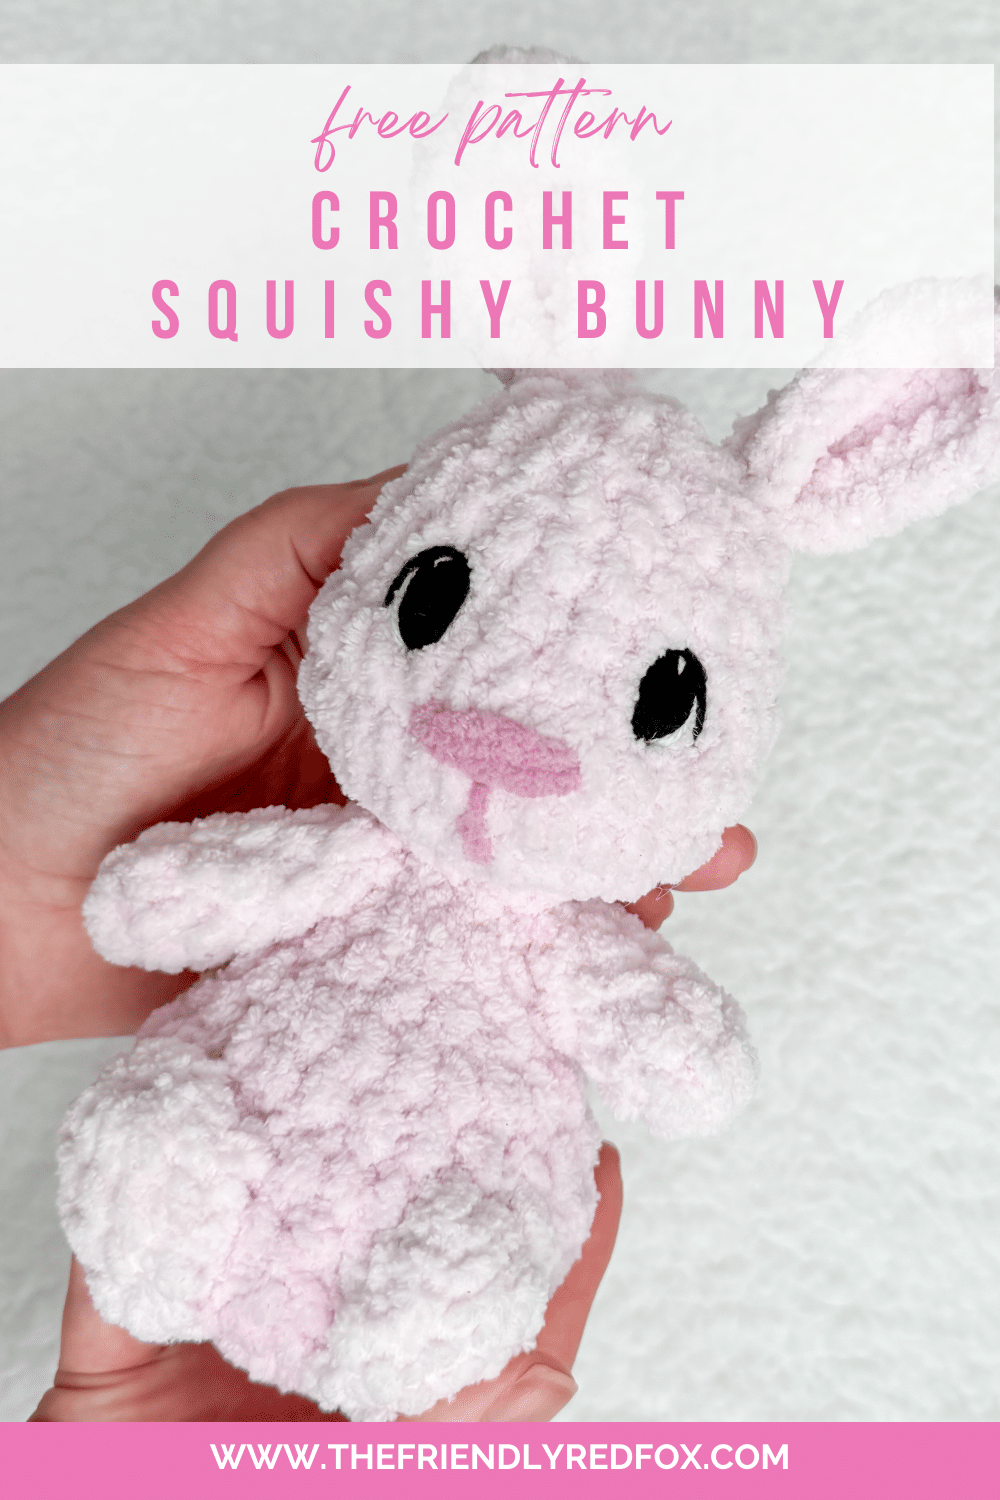 This is a free crochet pattern for the most adorable squishy bunny rabbit! Understuffed body and cuddly blanket yarn make this the perfect gift for small ones!